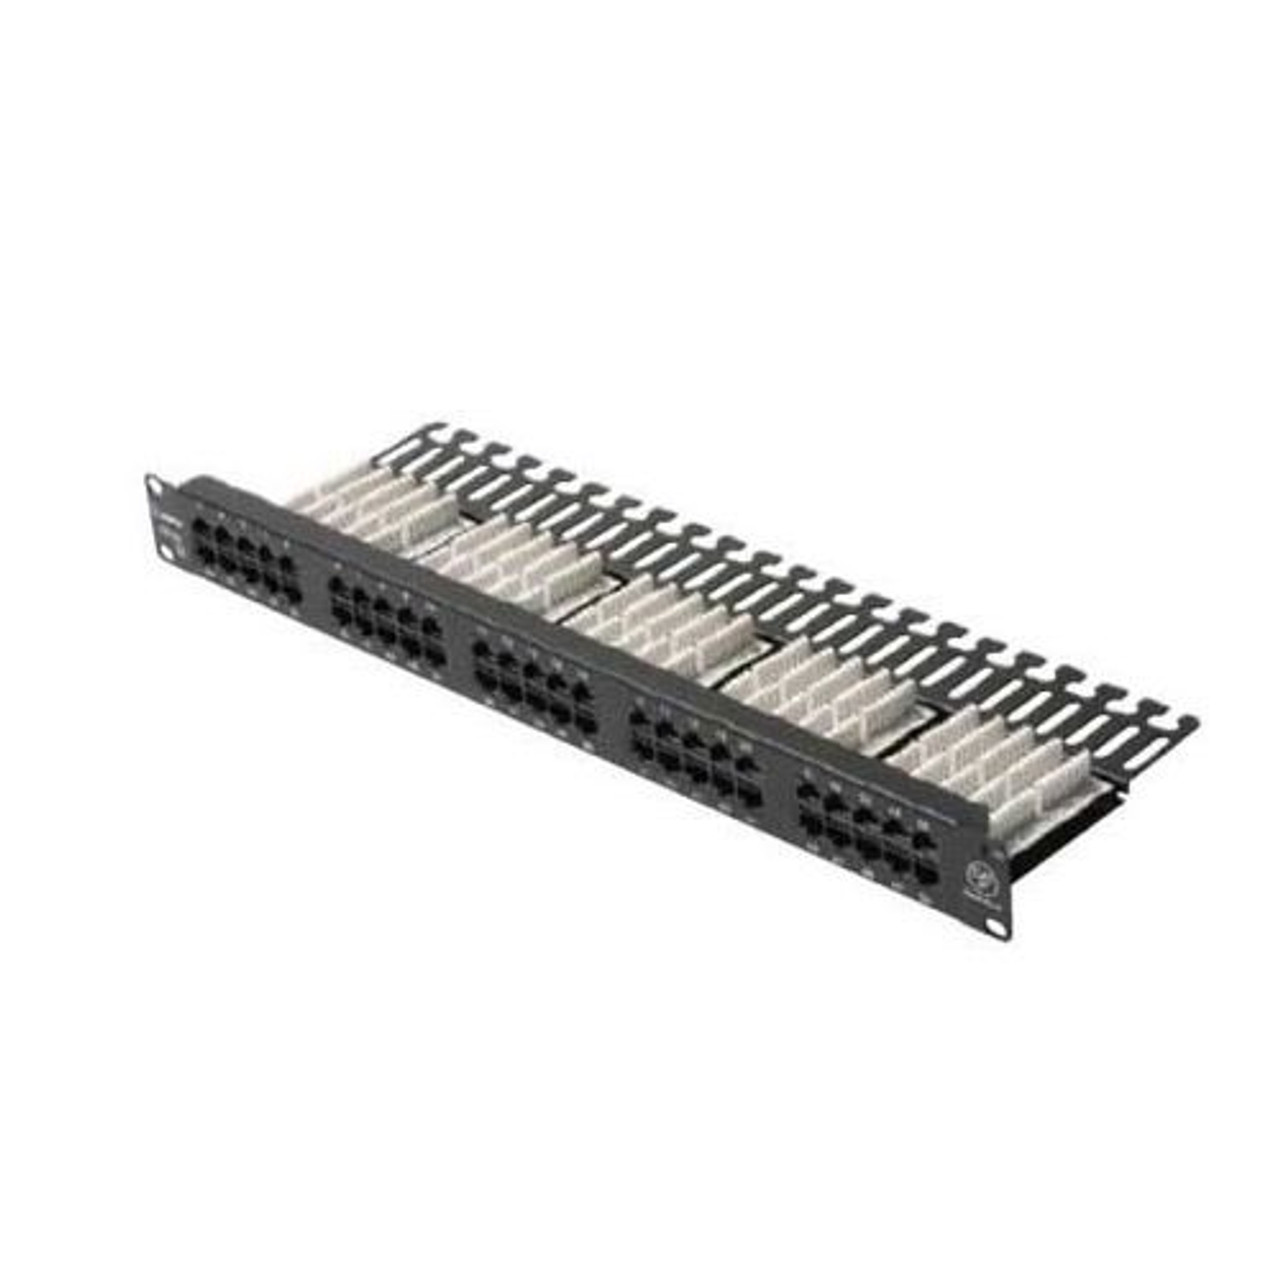 Eagle 50 Port Patch Panel CAT5E 110-IDC High Density Configuration with Punch Down Tool UL Listed 22-26 AWG Lead Contact 1 x EIA Rack Mount RJ45 350 MHz UTP Data Distribution RJ-45 Module Telephone Lan Ethernet Hub Modular CAT-5E Certified